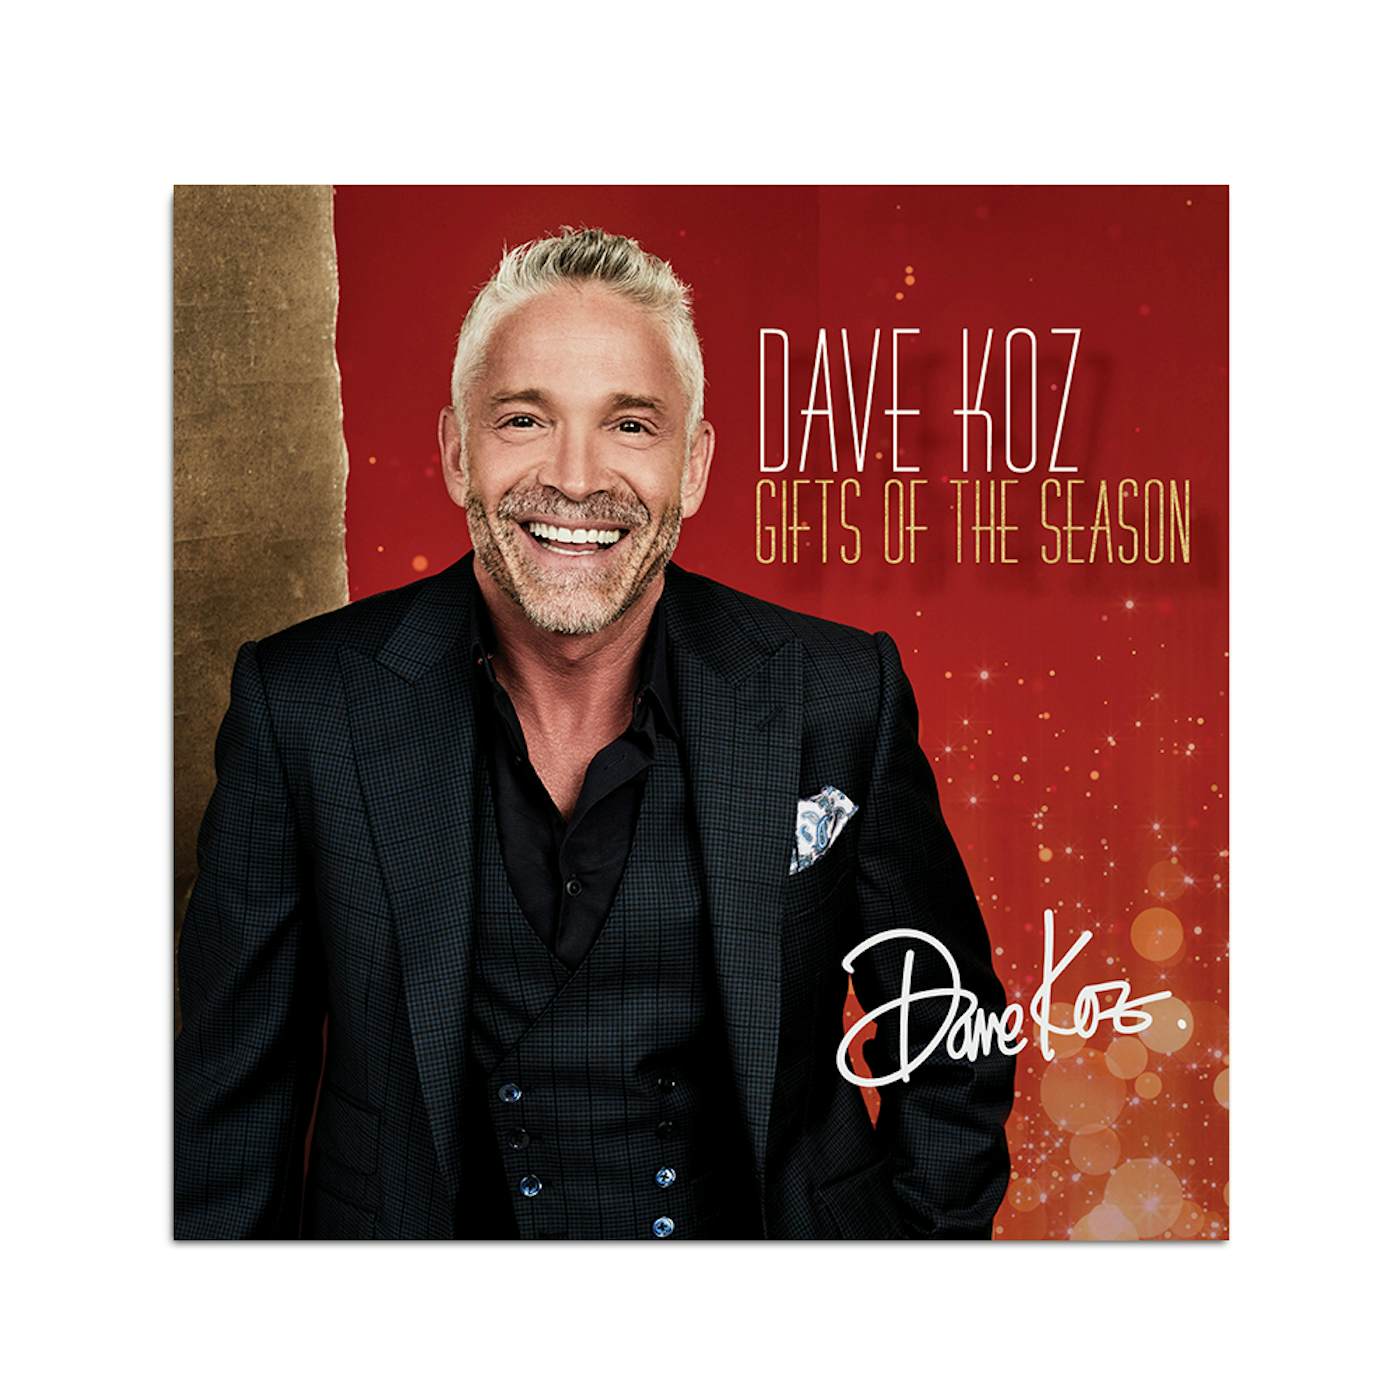 Dave Koz Gifts of the Season - CD (Signed)